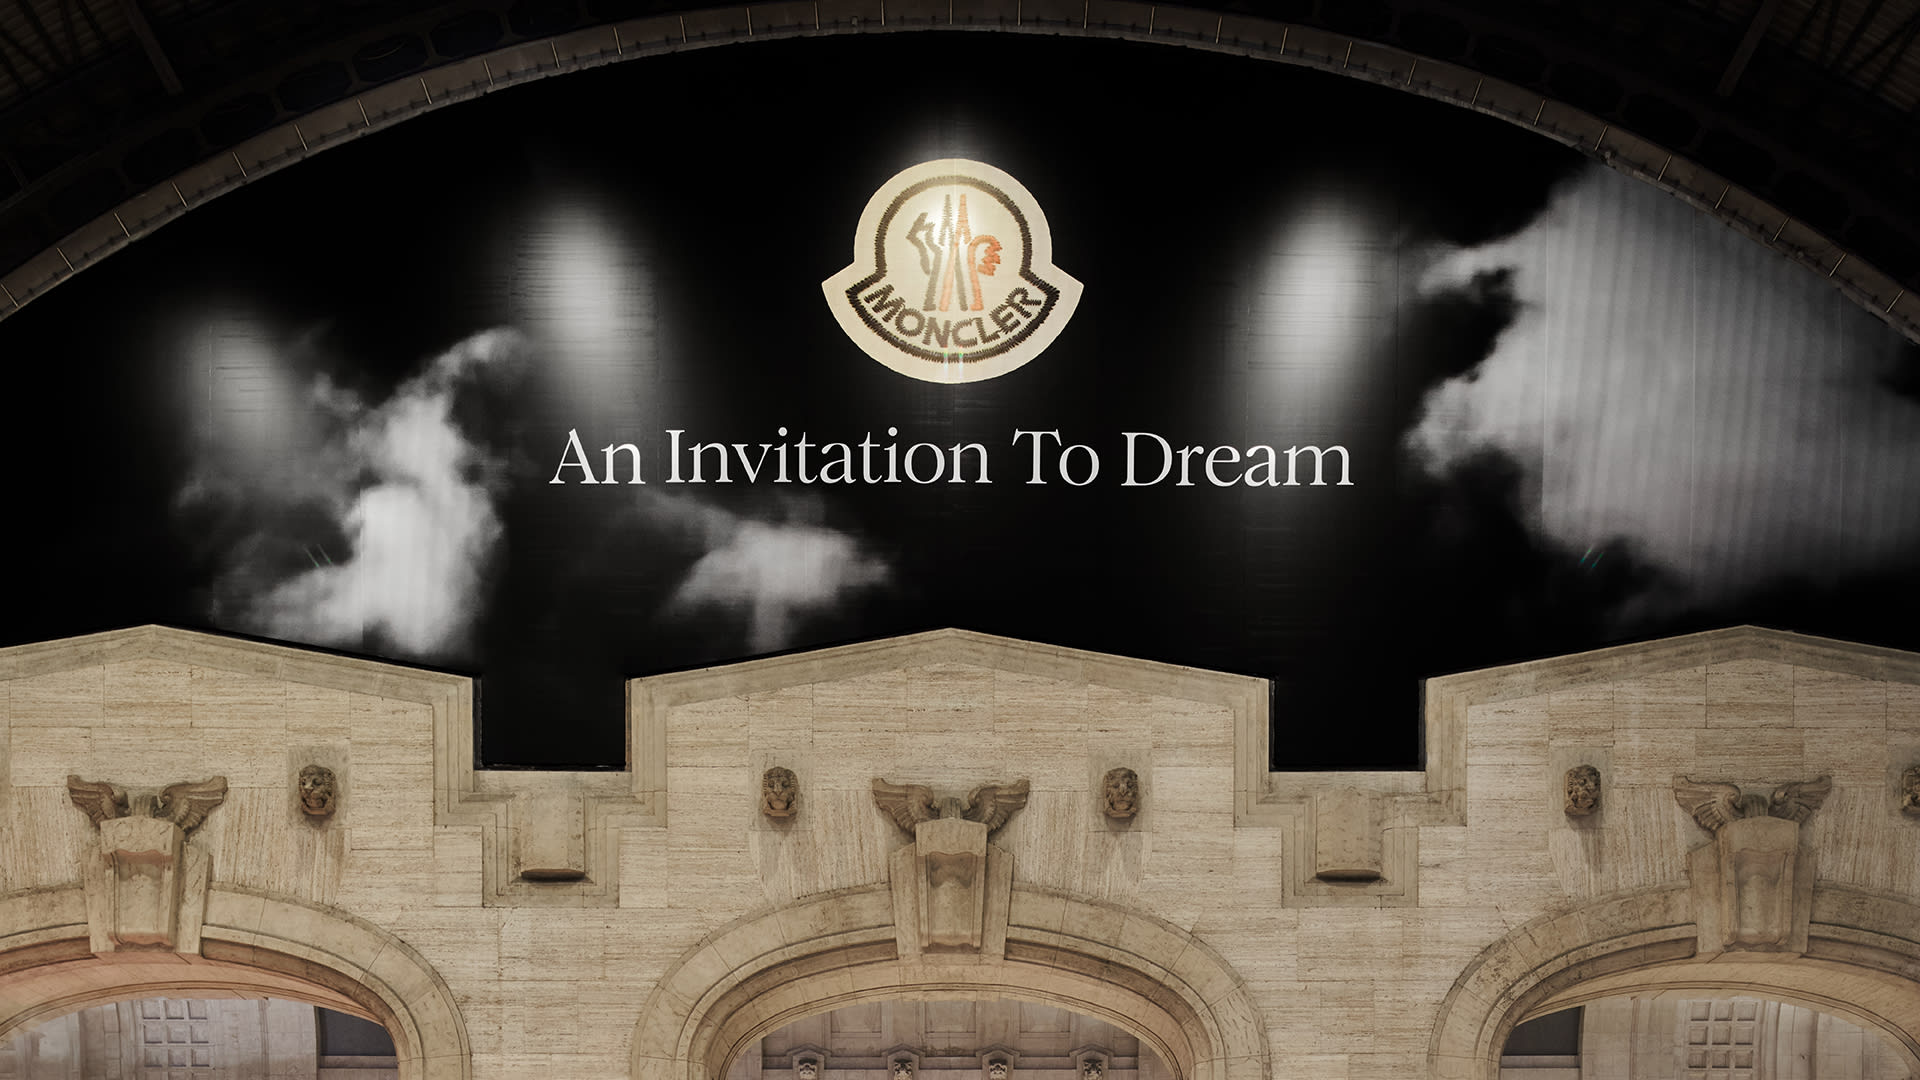 Moncler Transforms Milano Centrale into a Dreamscape with ‘An Invitation To Dream’ Exhibition and Star-Studded Dinner